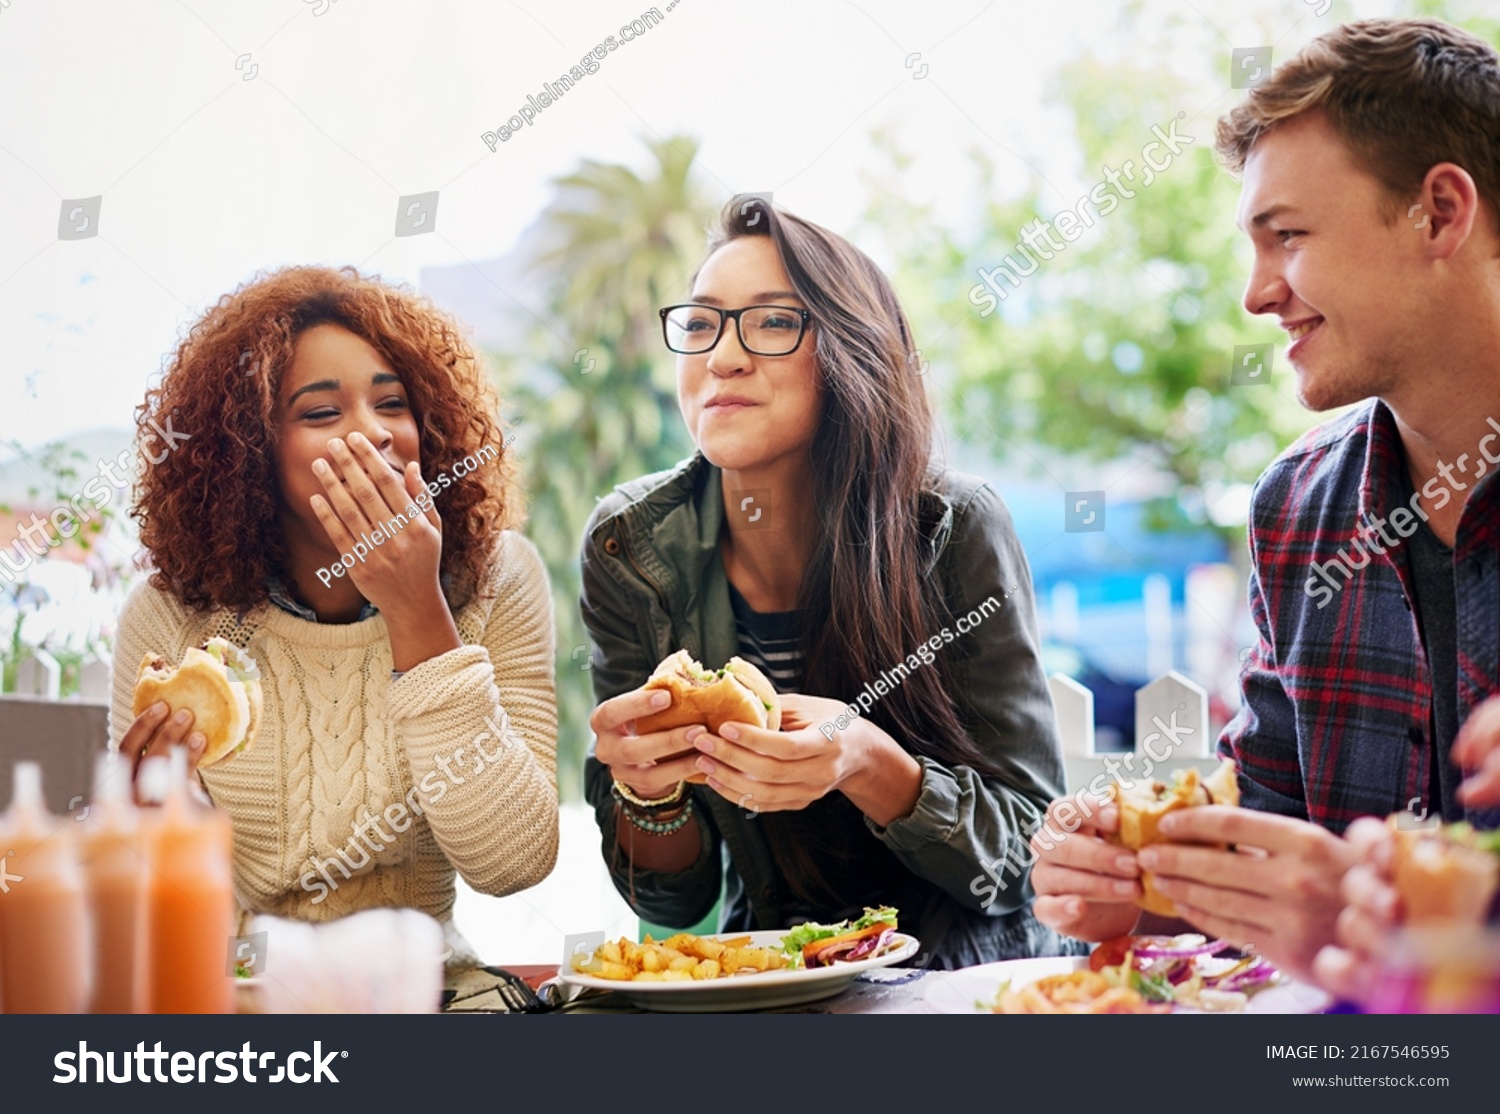 Good food and laughter go hand-in-hand. Cropped shot of three friends eating burgers outdoors. #2167546595